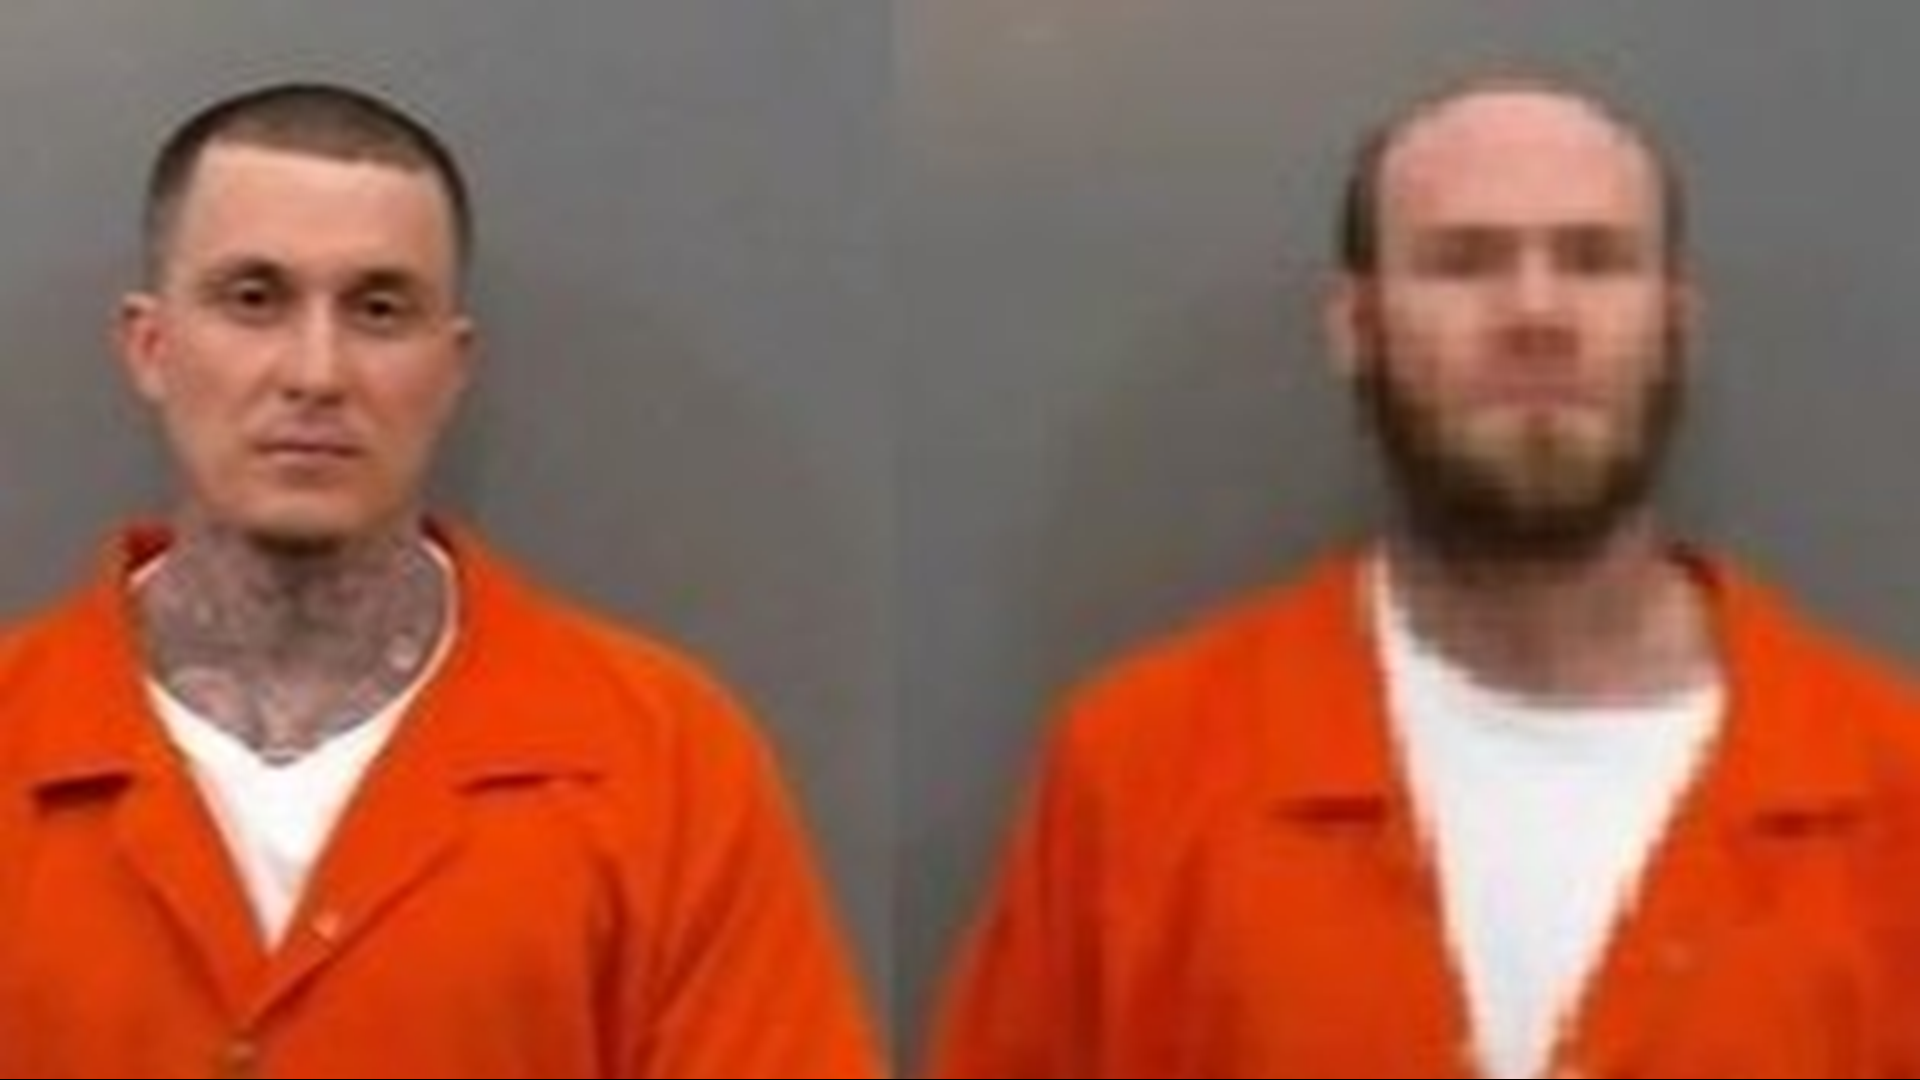 U.S. Marshals are looking for escaped inmates from the Jefferson County Jail.